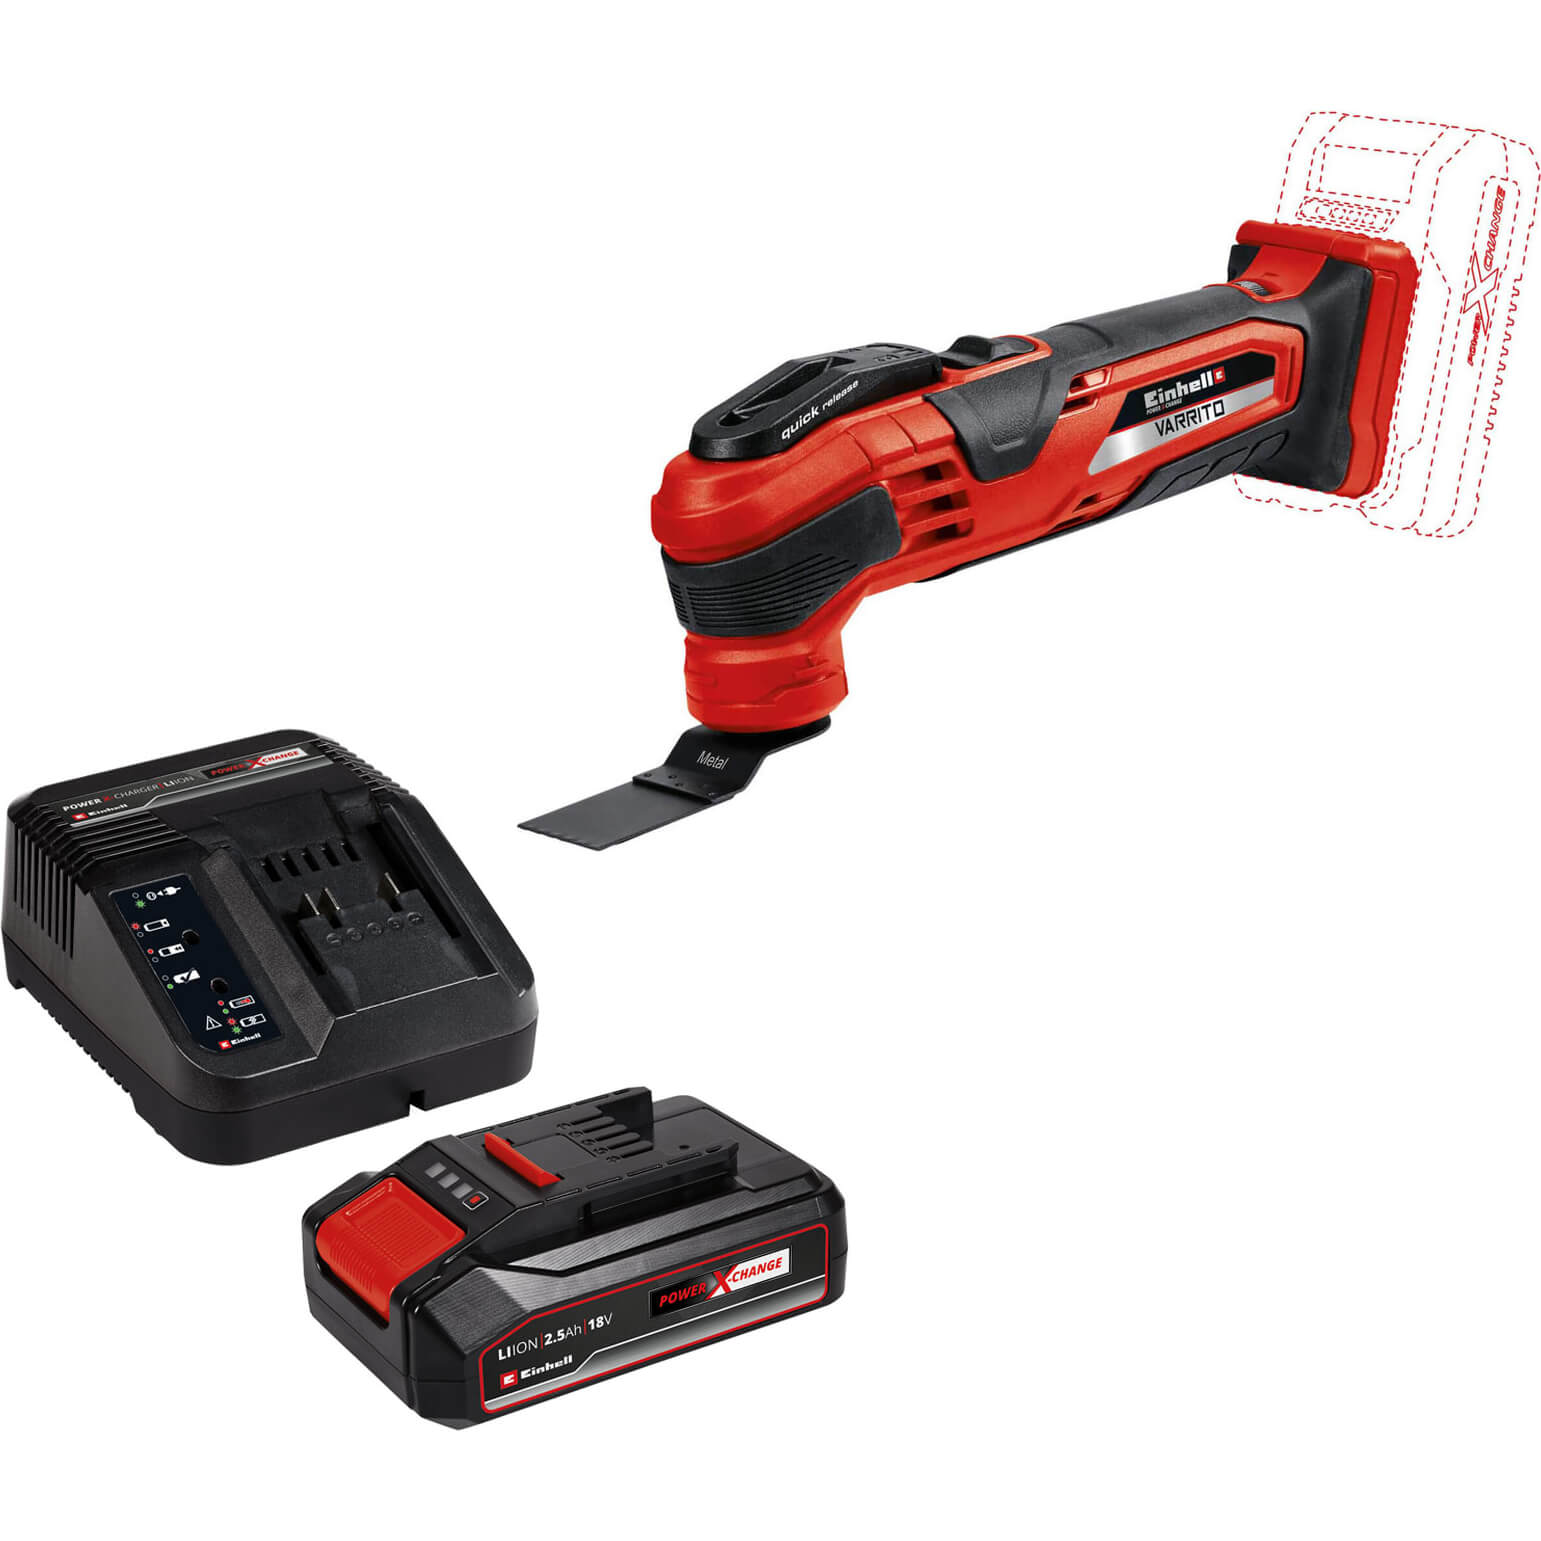 Image of Einhell VARRITO 18v Cordless Oscillating Multi Tool 1 x 2.5ah Li-ion Charger No Case